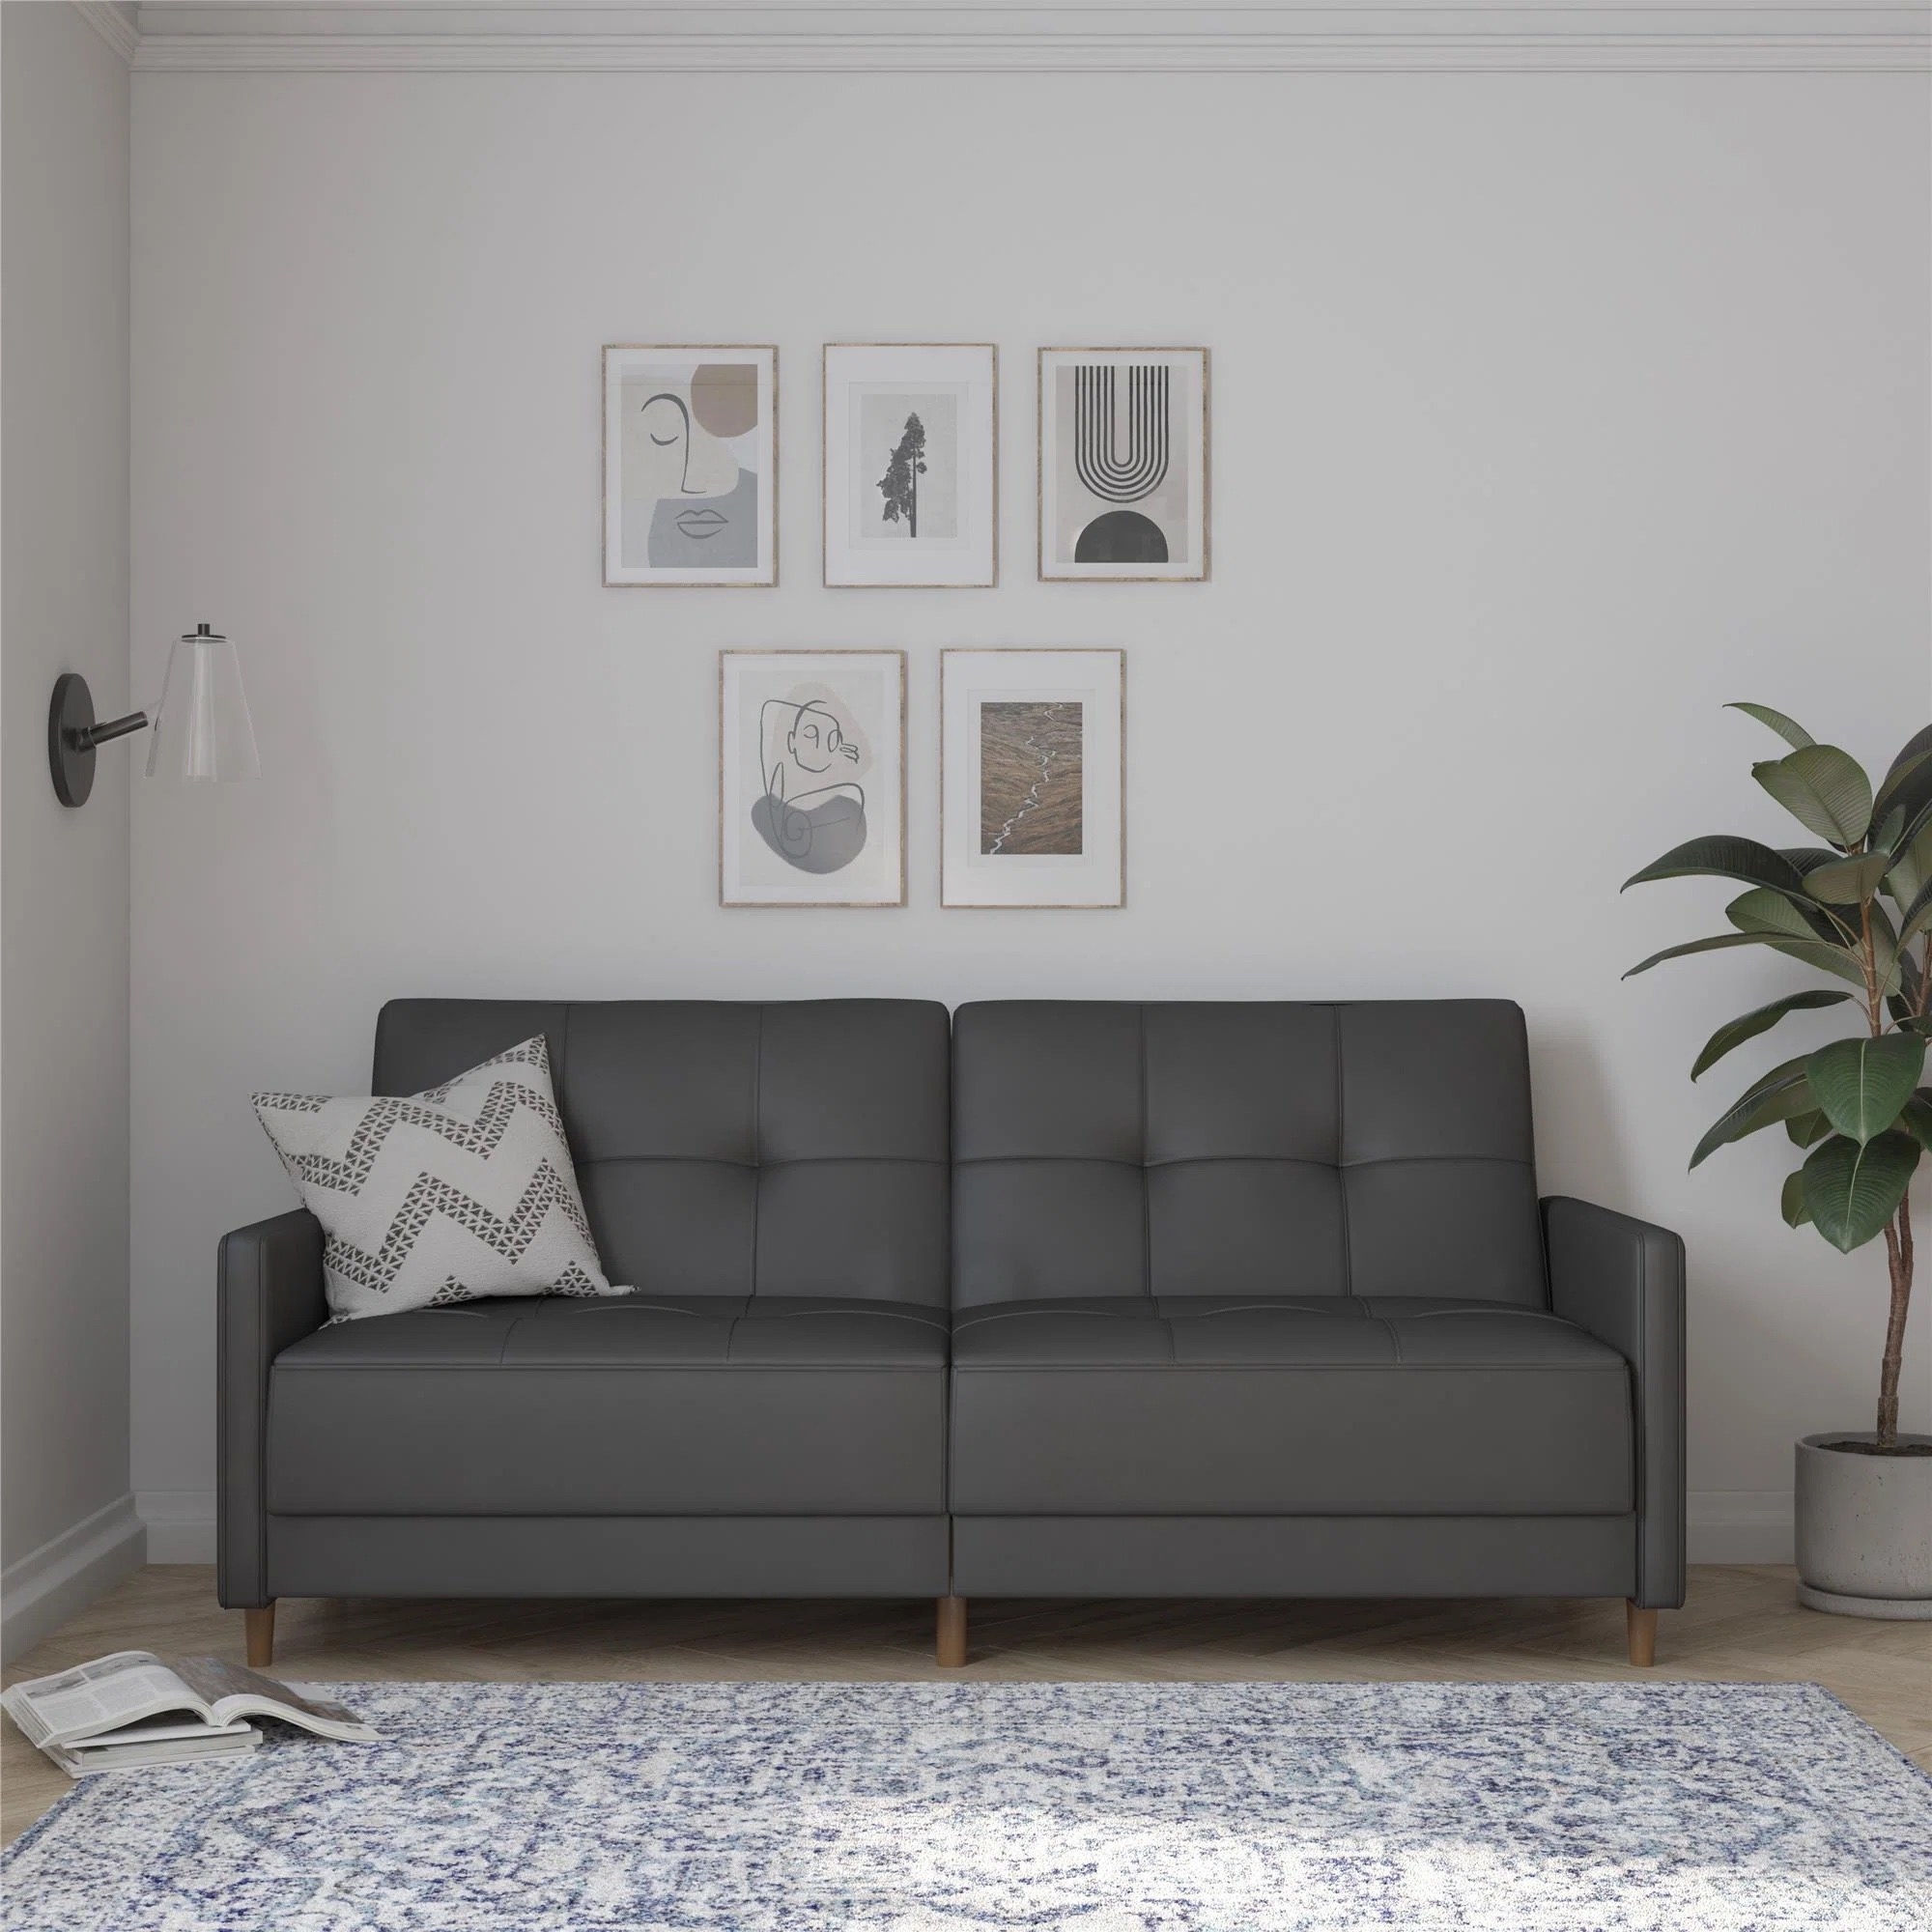 a dark gray faux leather tufted convertible sofa in a living room